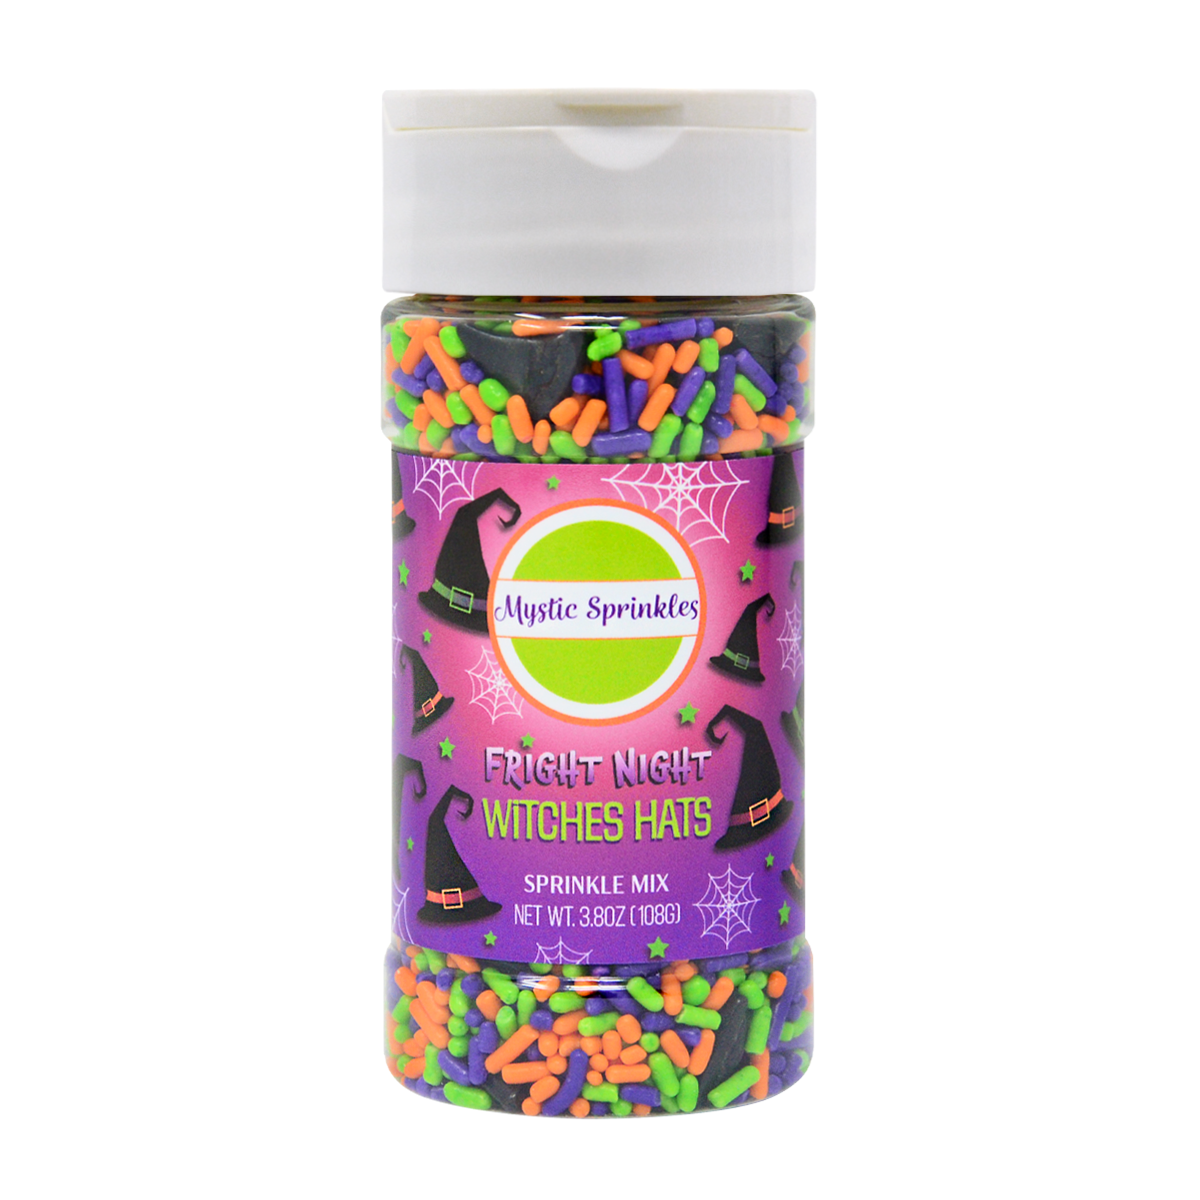 Load image into Gallery viewer, Fright Night Witches Hats Sprinkle Mix 3.8oz
